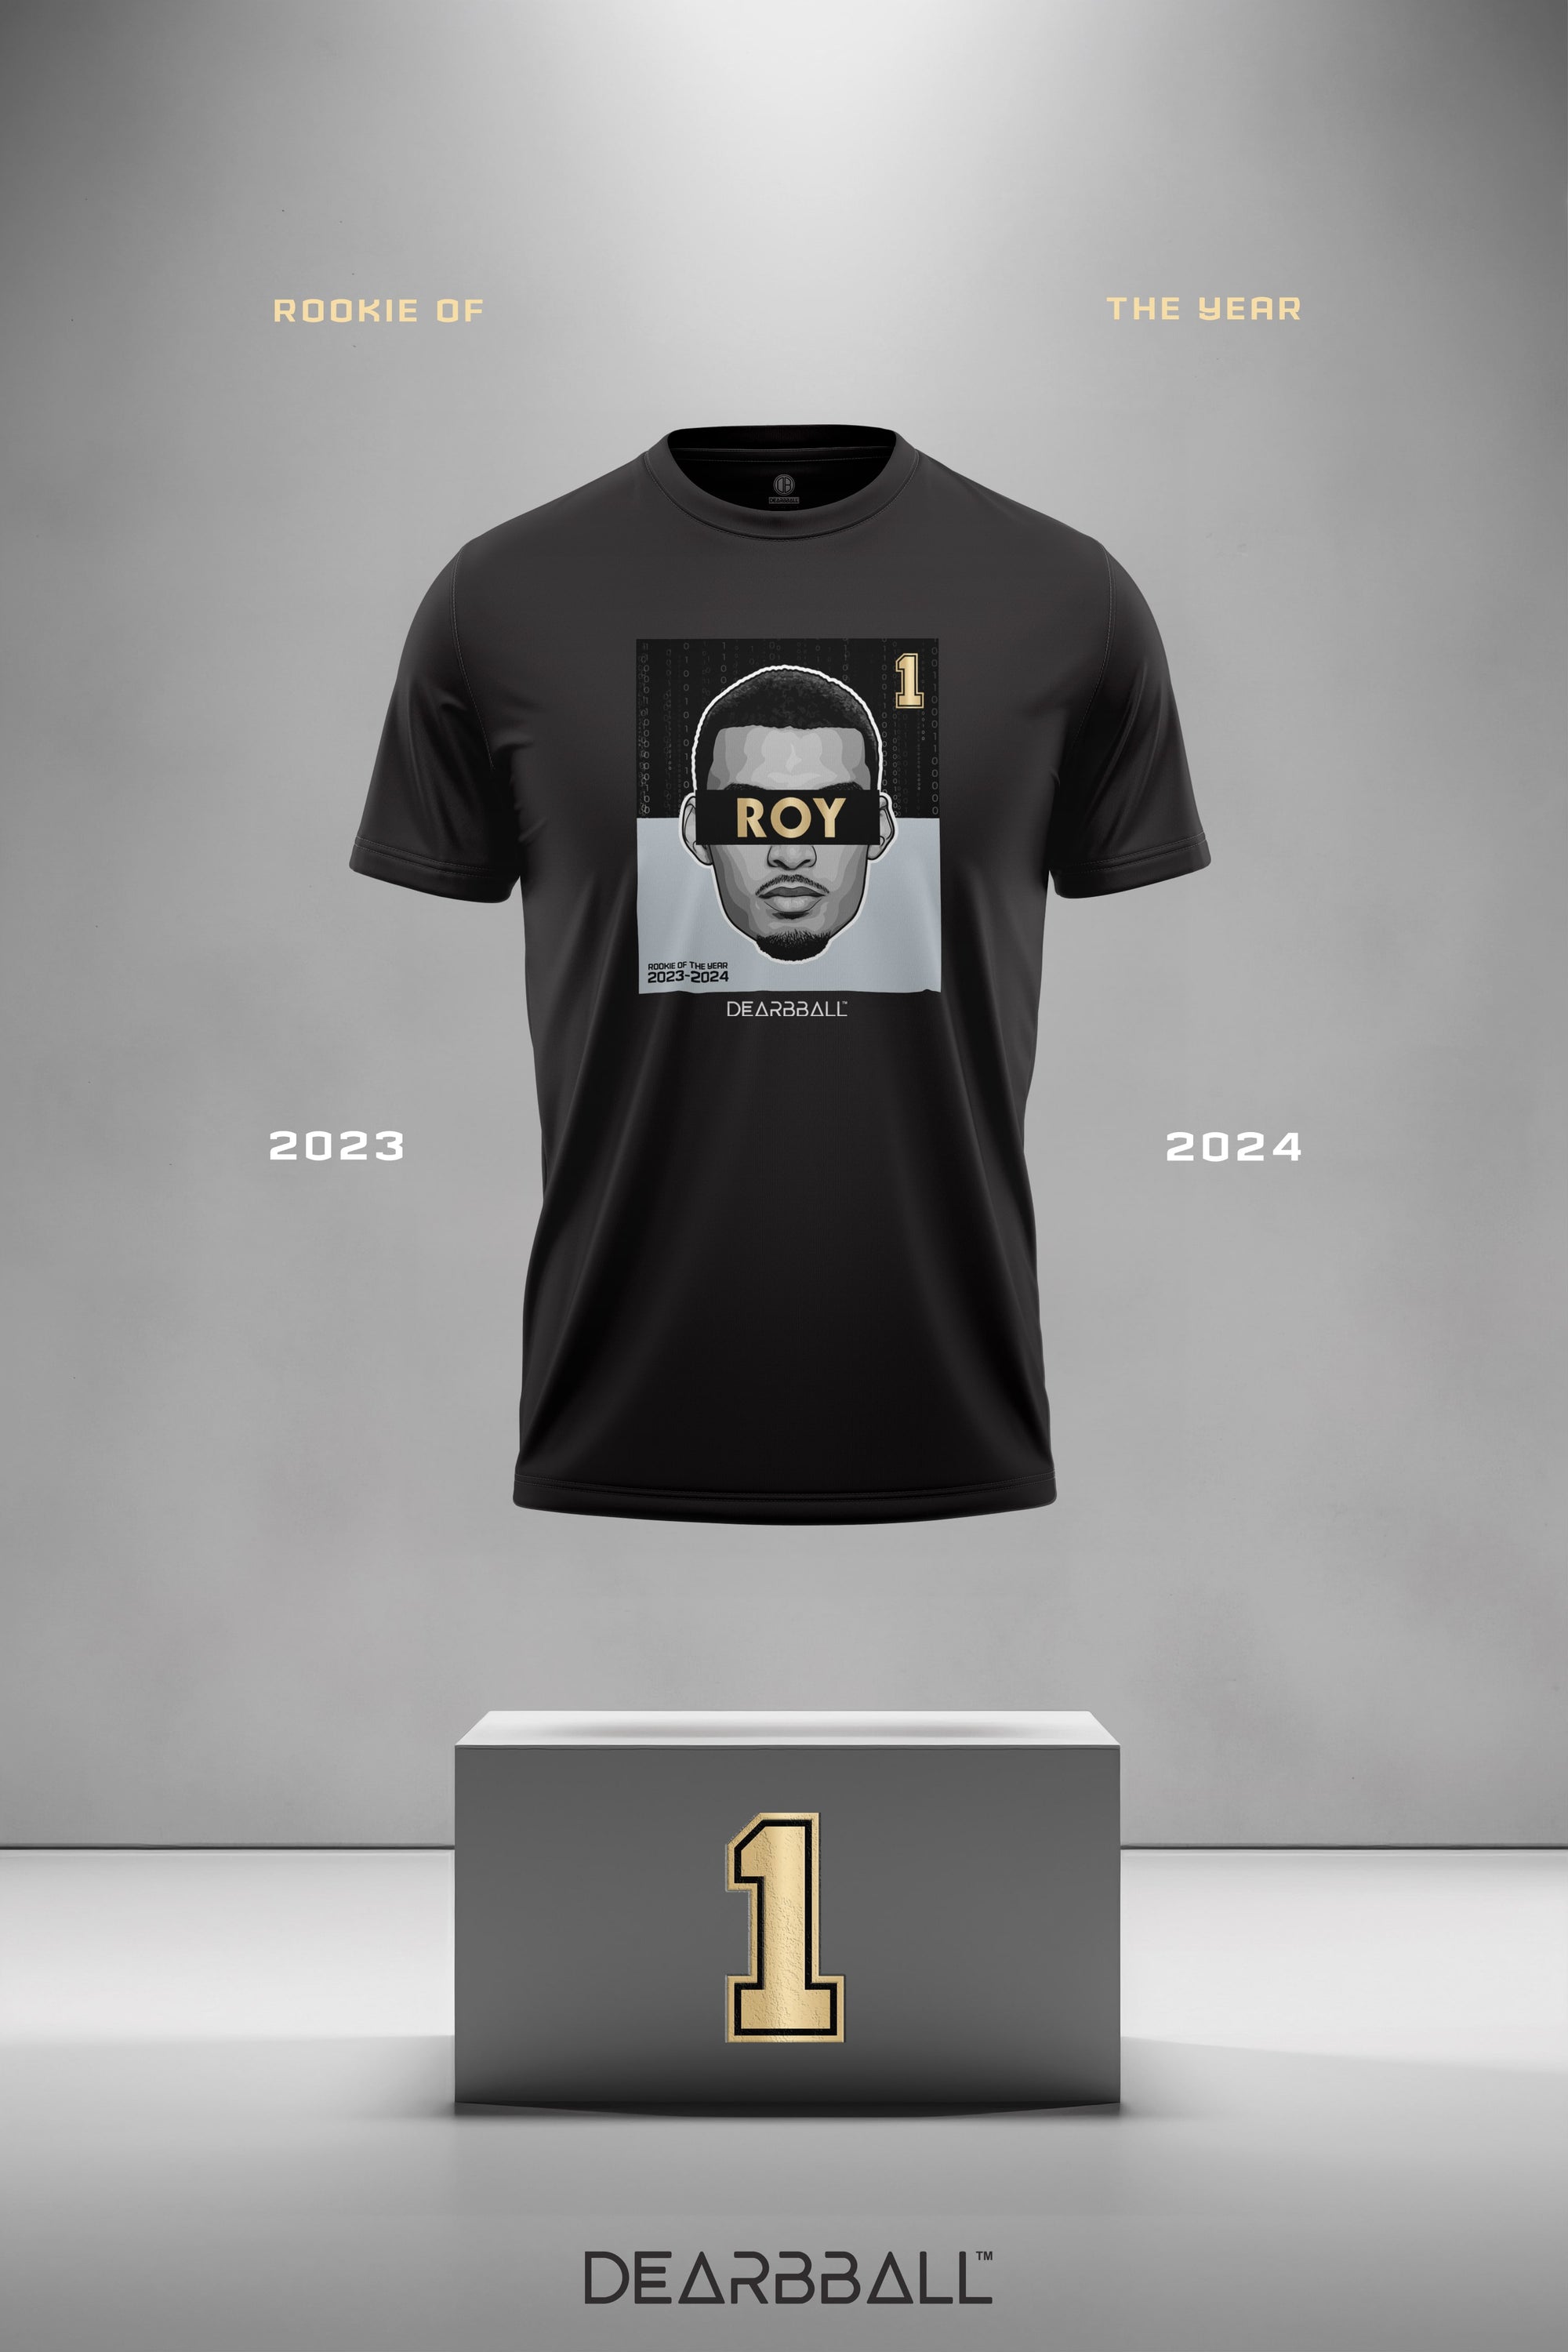 [ENFANT] DearBBall T-Shirt - Rookie Of The Year Edition